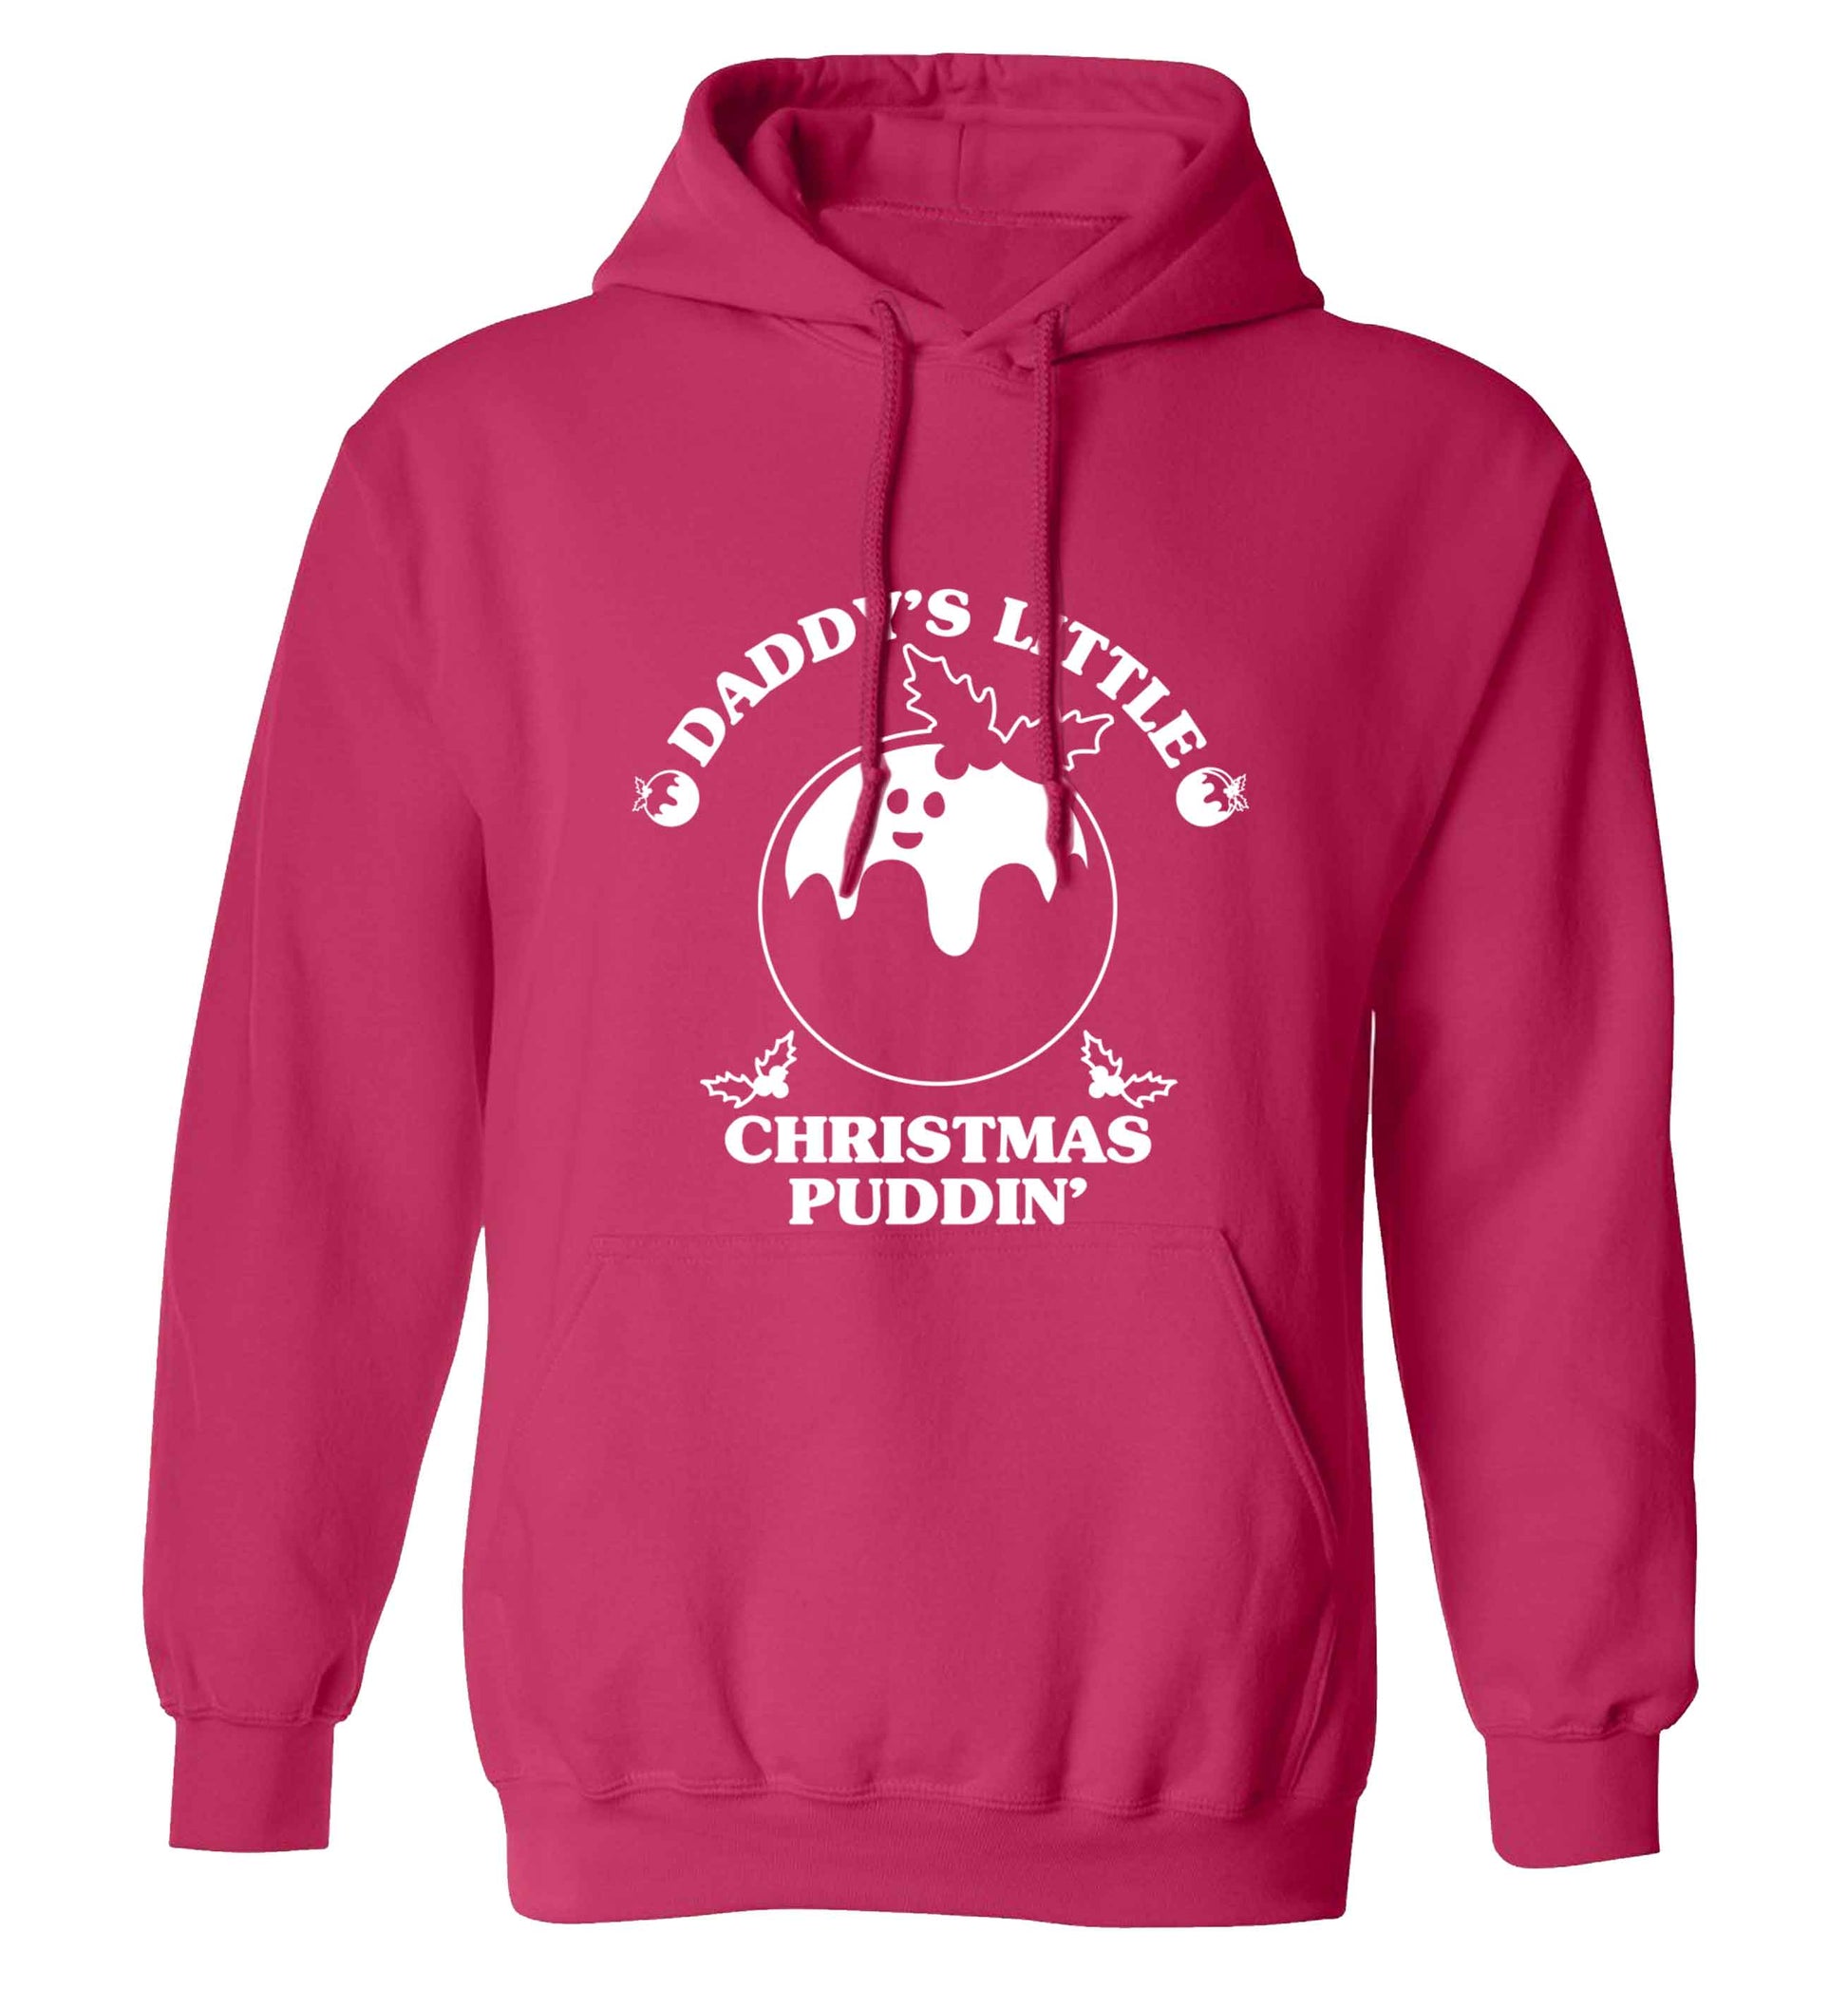 Daddy's little Christmas puddin' adults unisex pink hoodie 2XL